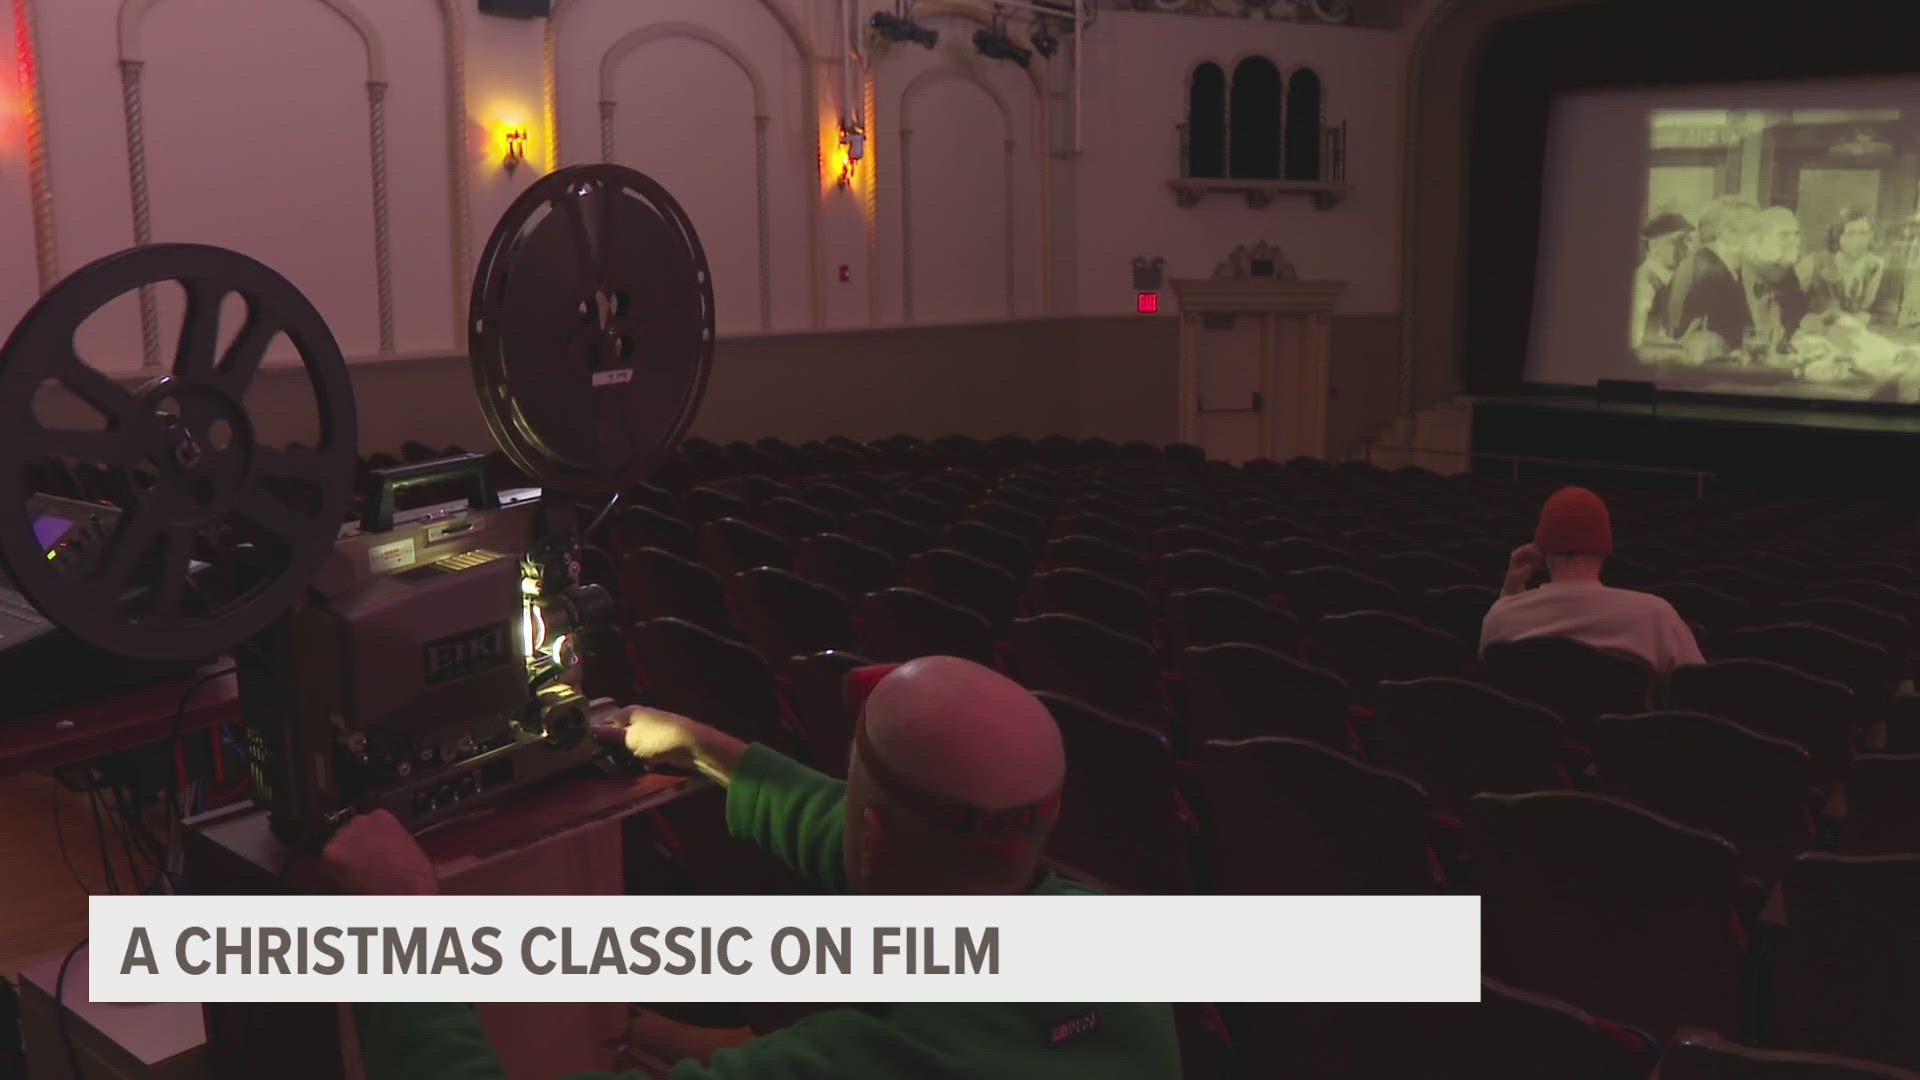 Wealthy Theatre in Grand Rapids is showing the Christmas classic "It's a Wonderful Life" on a 16mm film this holiday season.